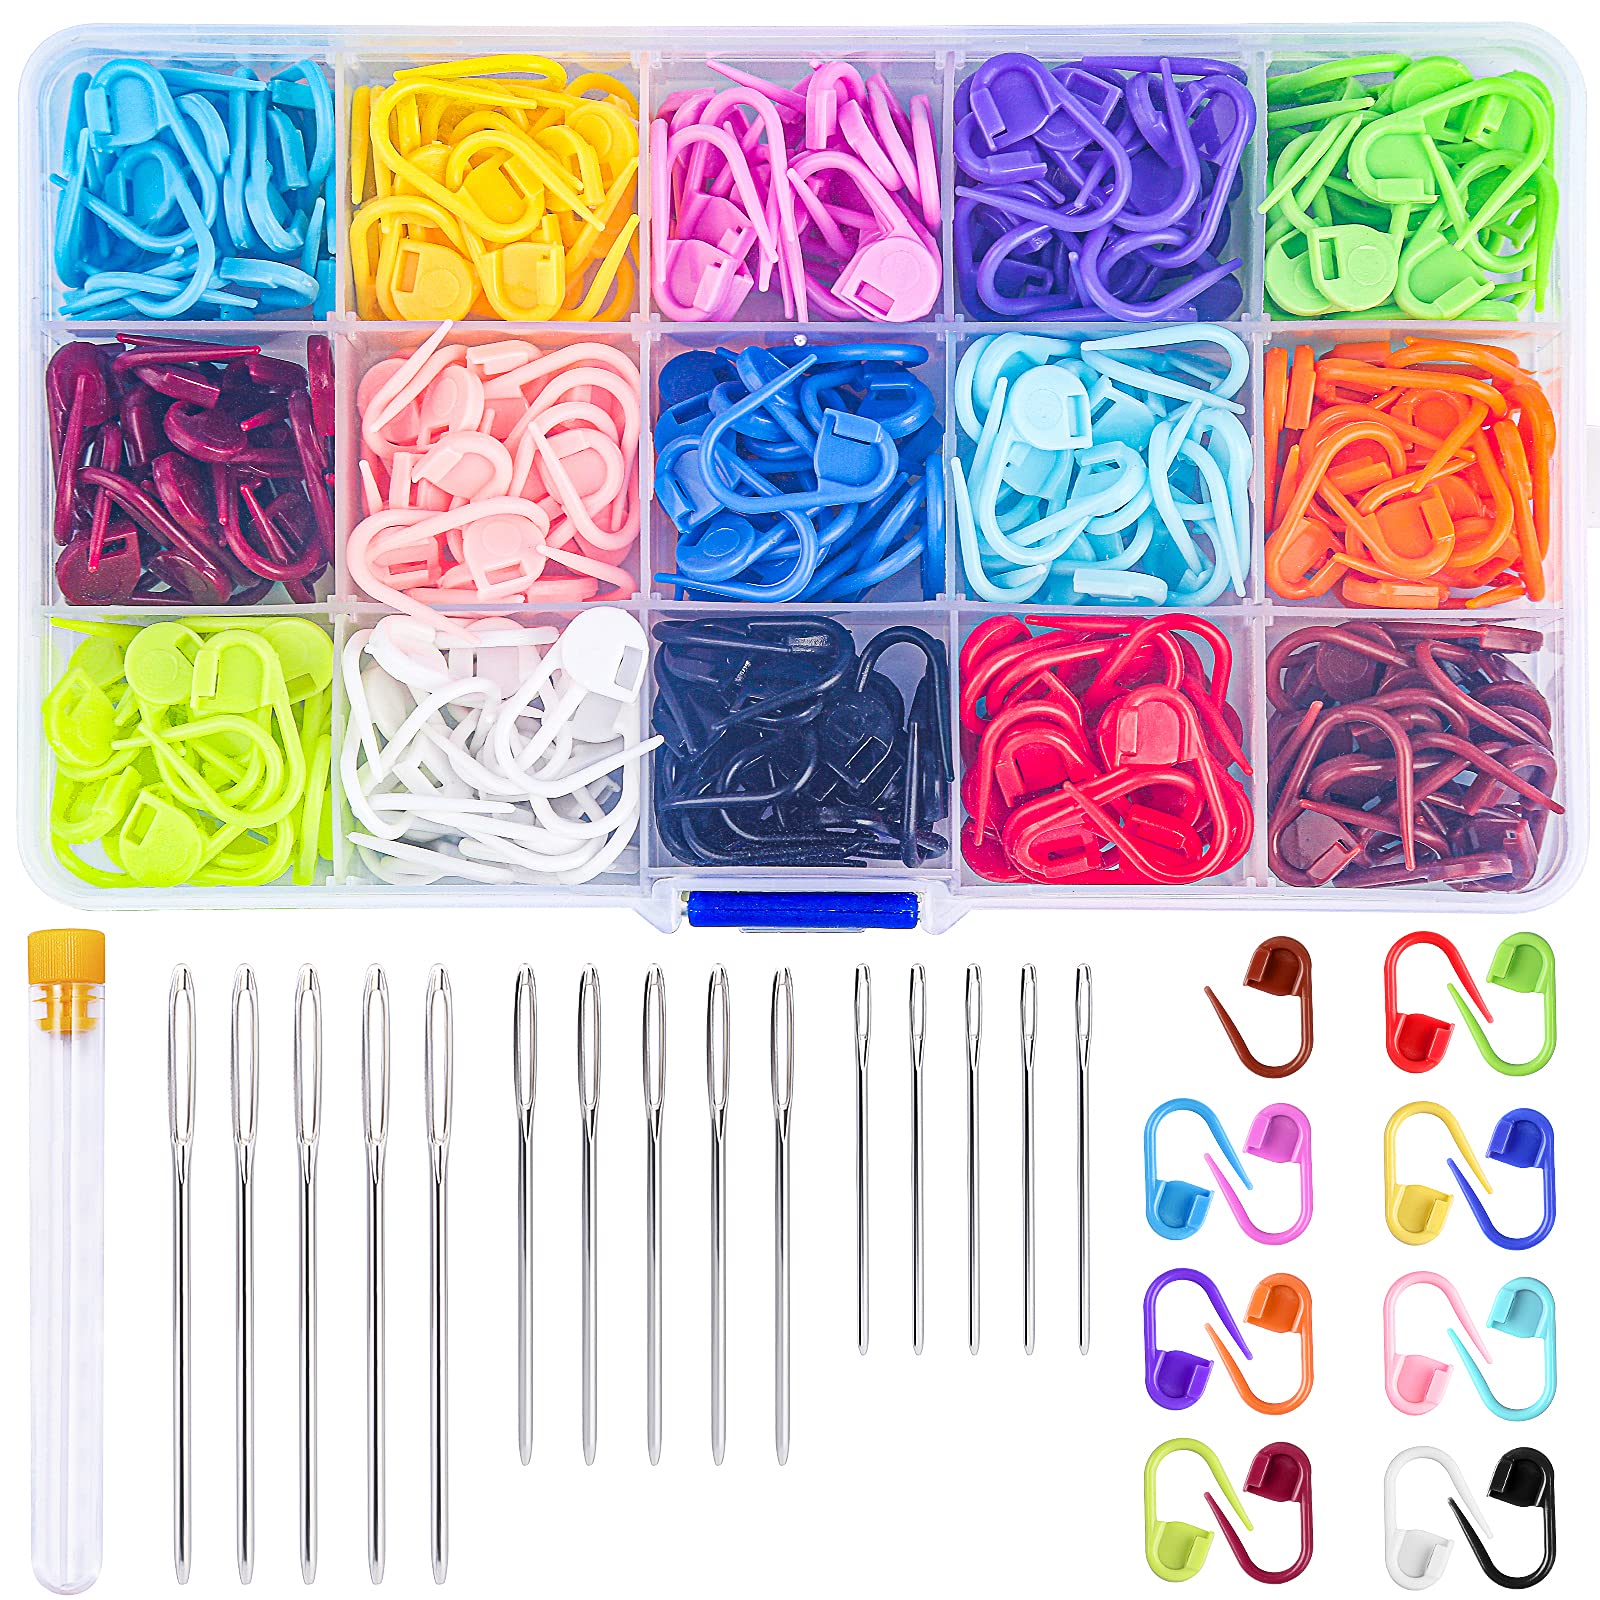  50PCS Plastic Sewing Needles, Large Eye Plastic Yarn Needles  for Kids, 7cm/2.76inch Plastic Needles for Yarn and Craft Plastic  Embroidery Needle for DIY Sewing Handmade Crafts